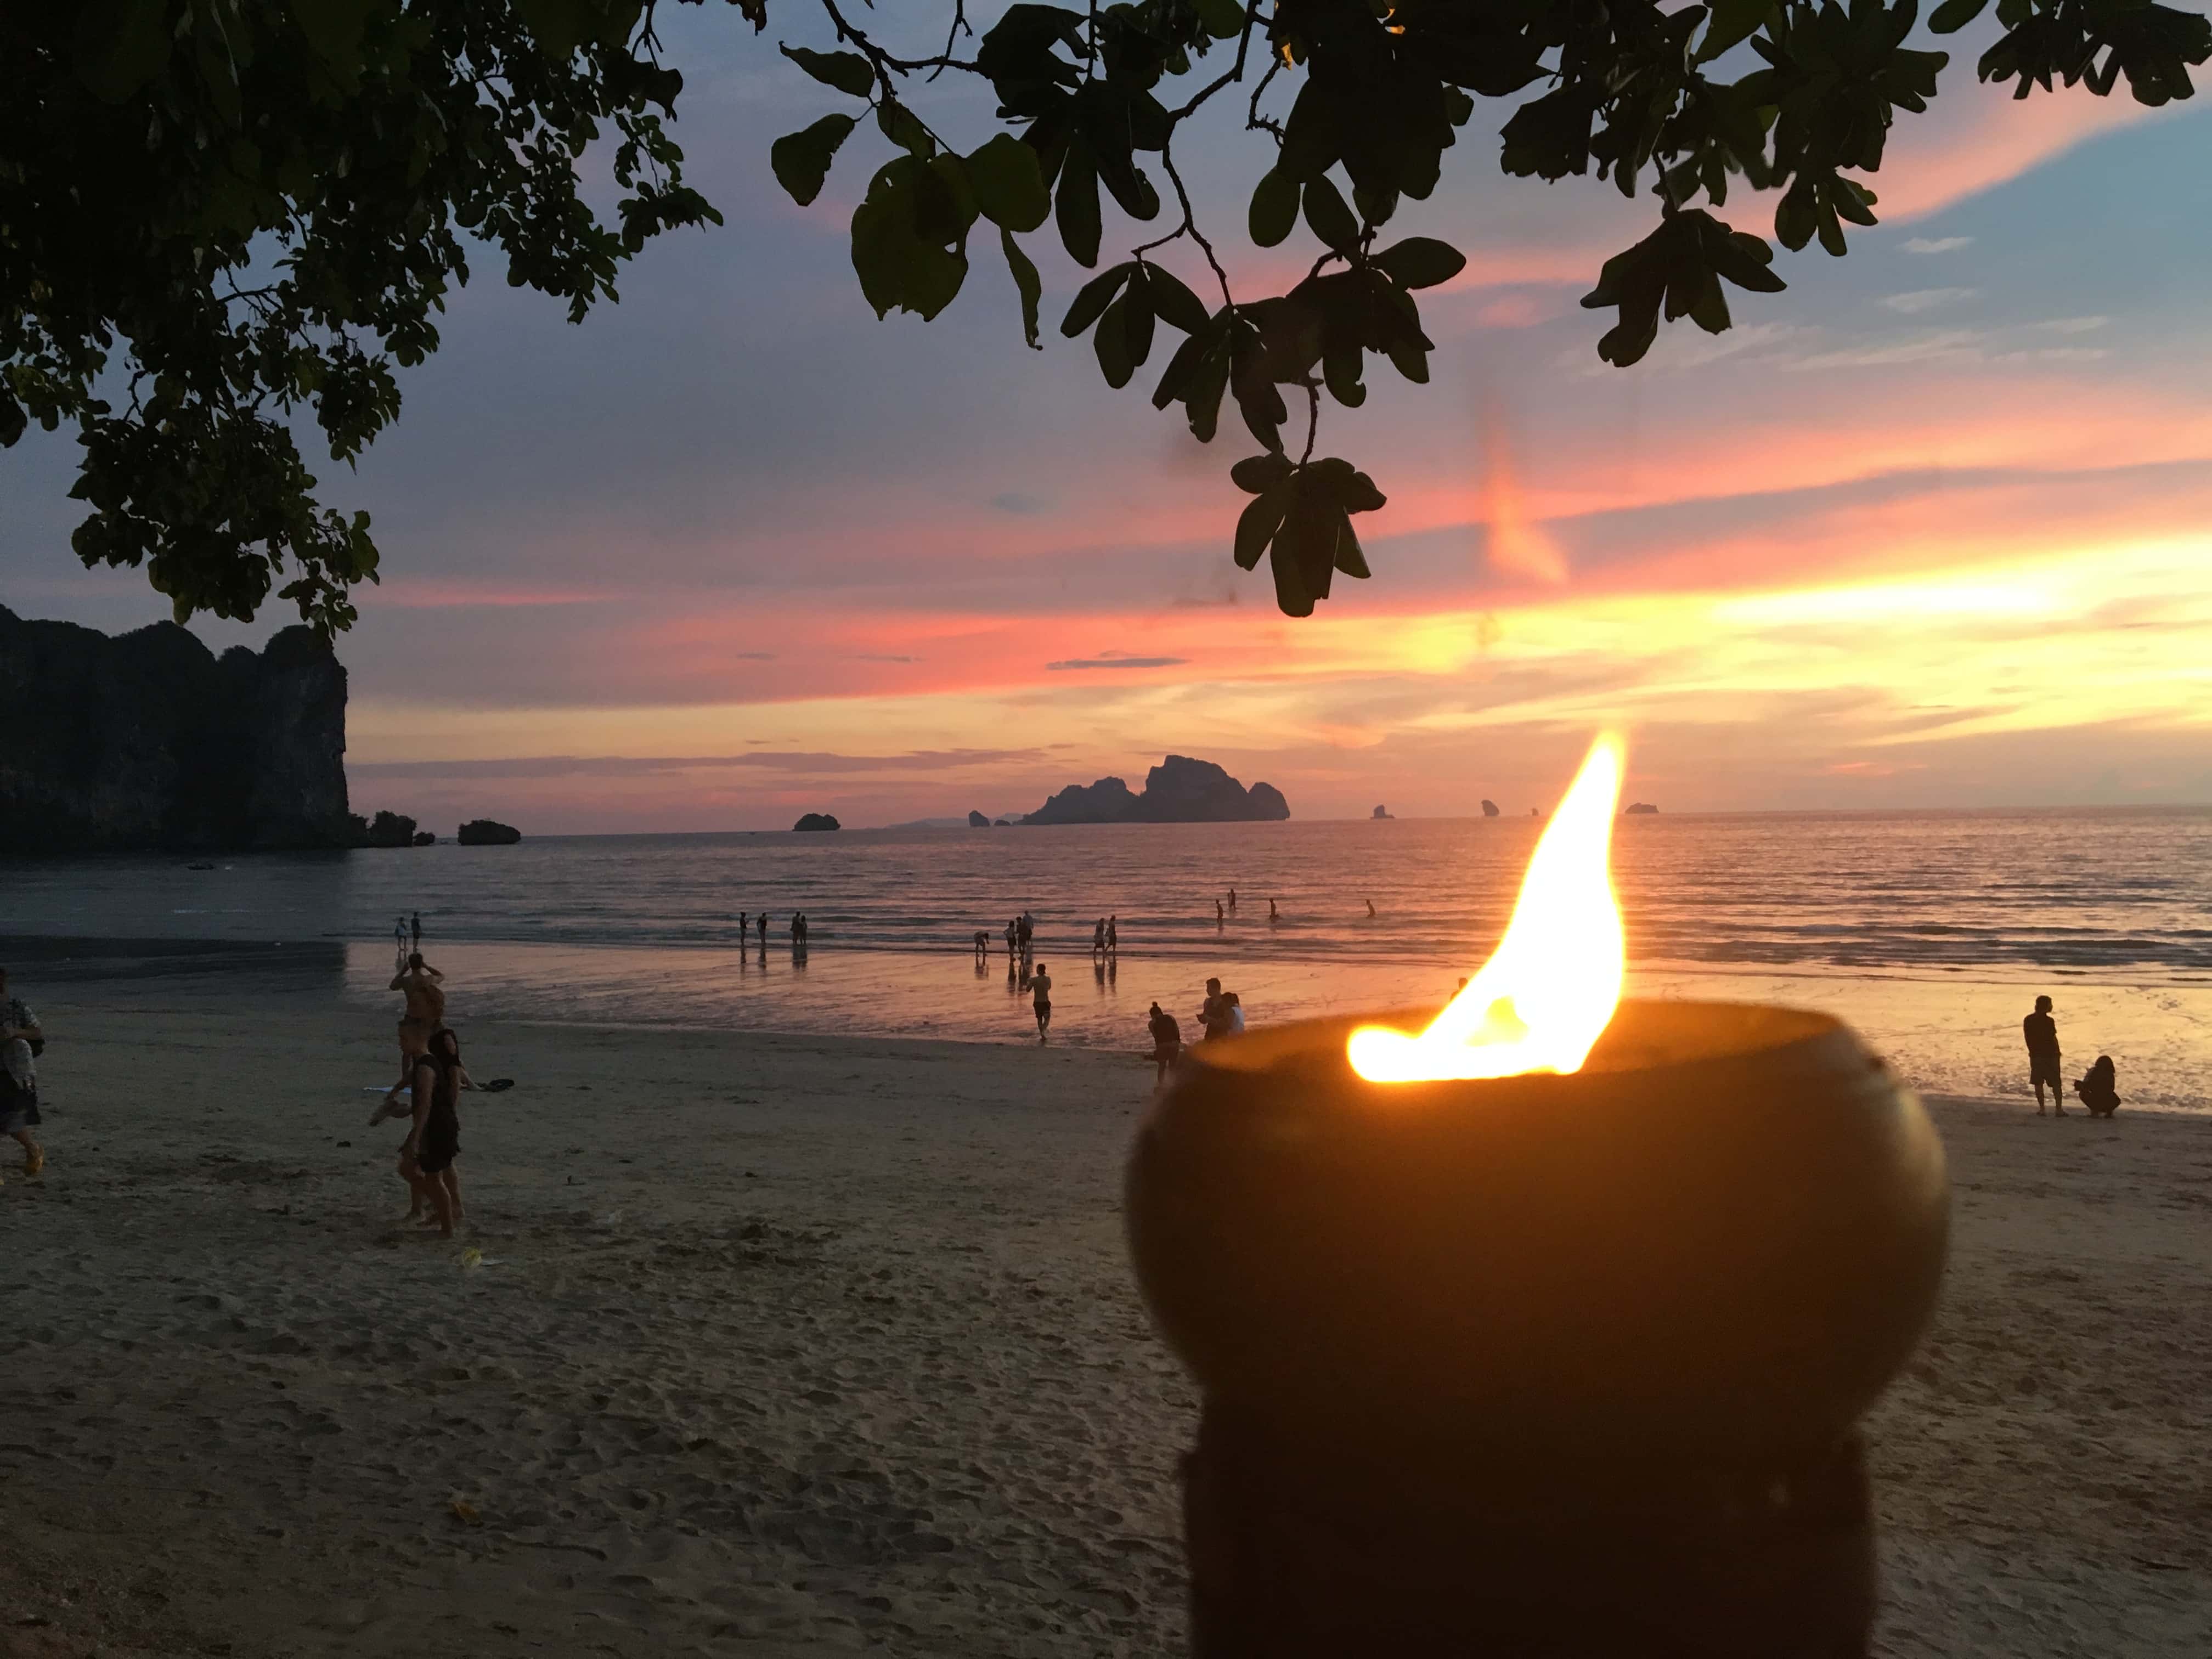 More sunsets at Thailand Beaches.